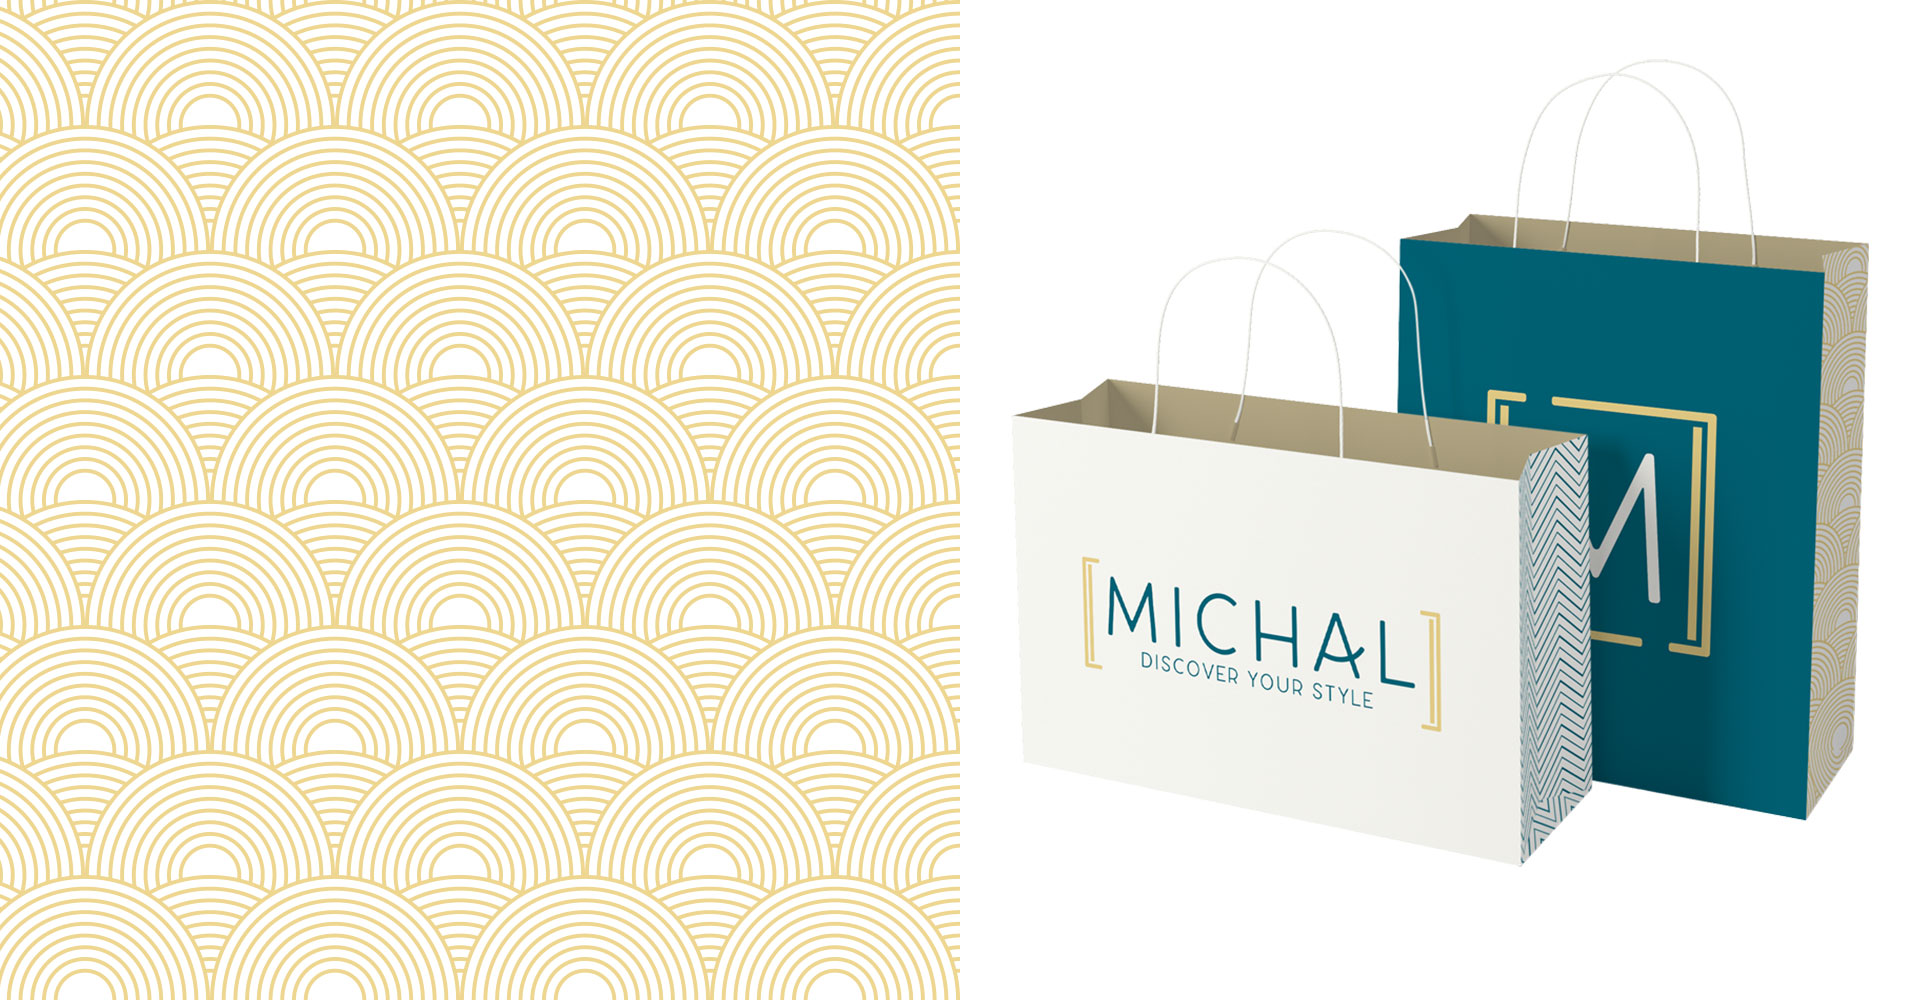 Michal branded shopping bags